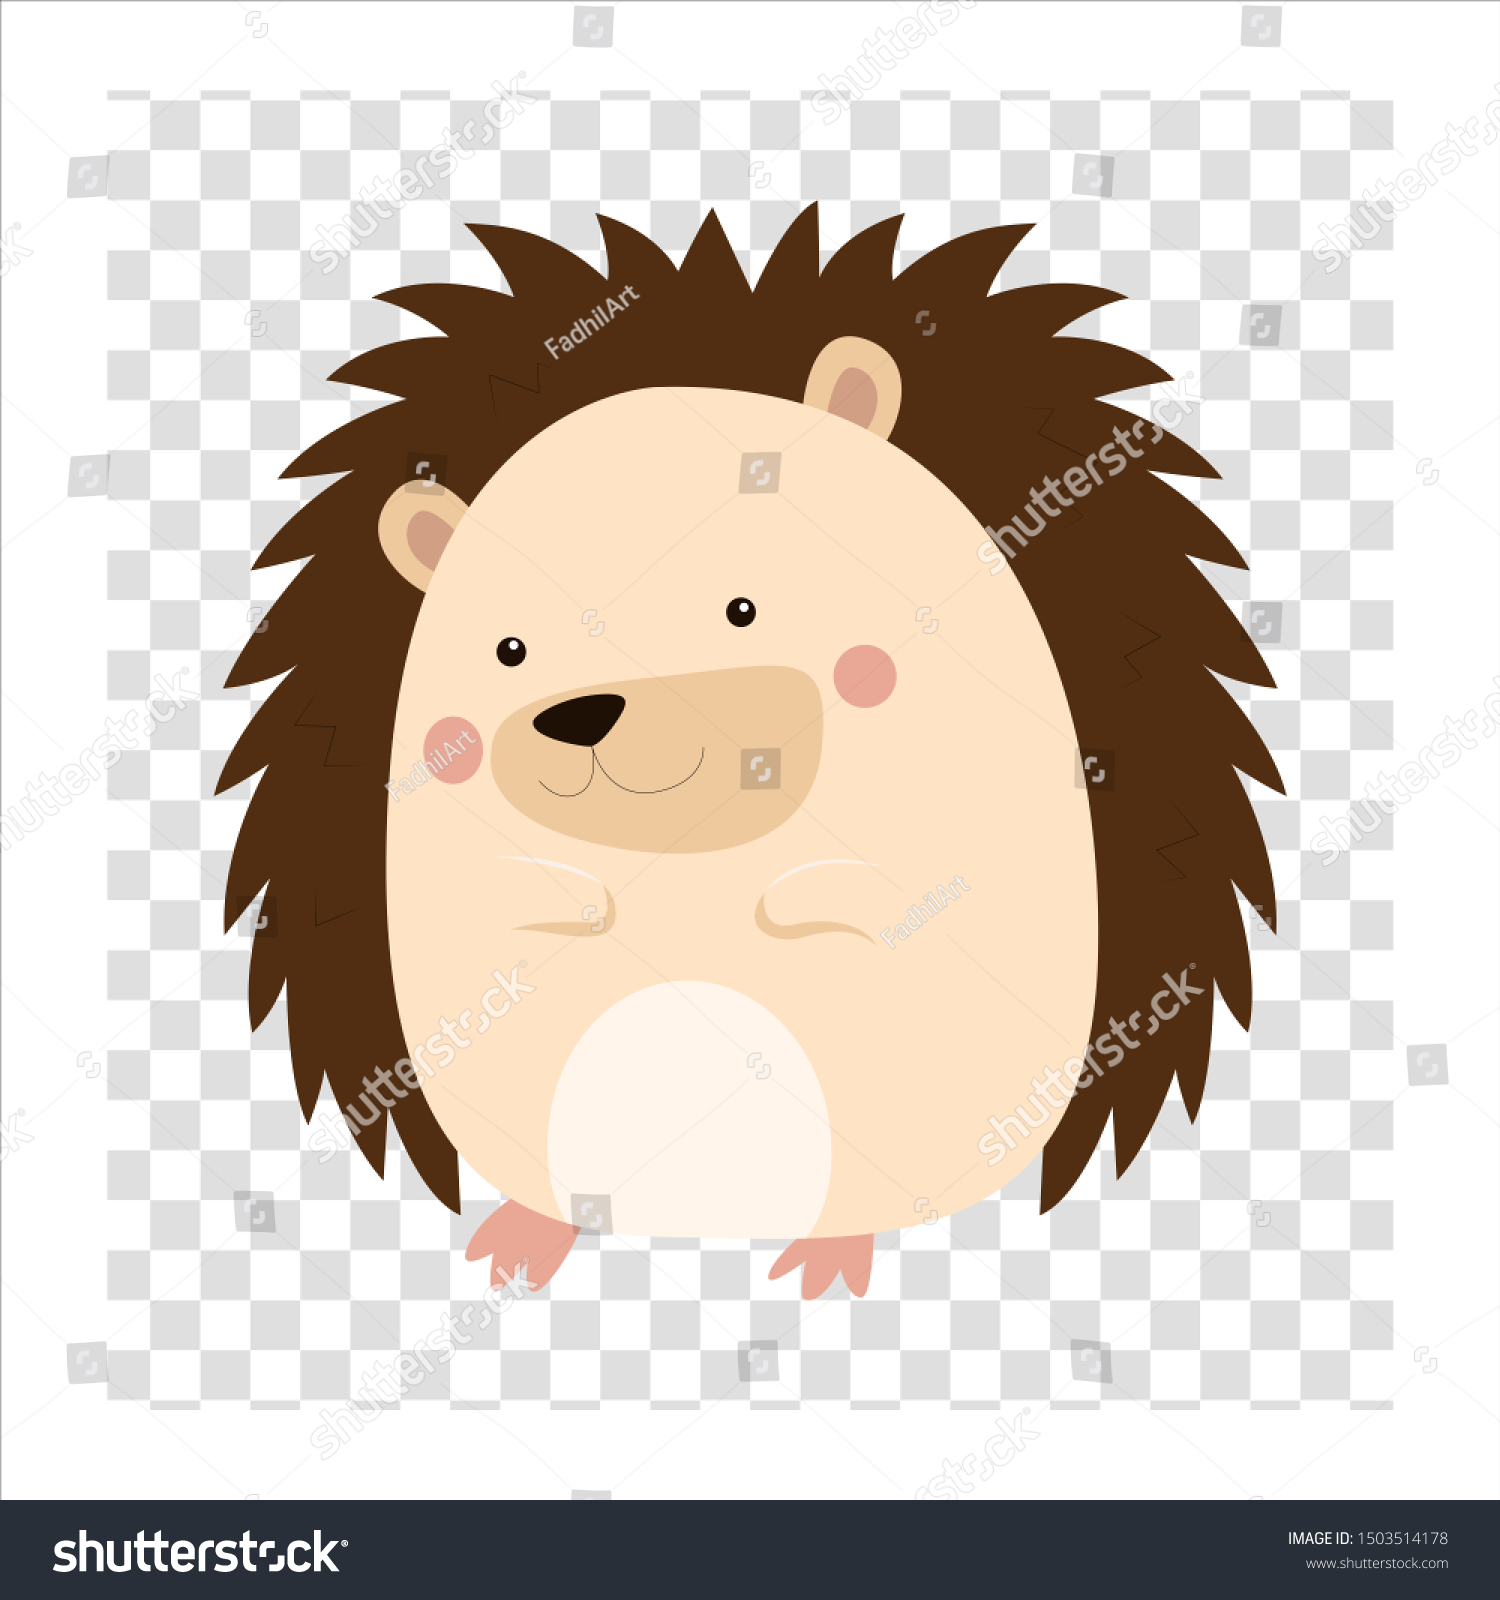 Porcupine Icon Vector Isolated Cute Cartoon Stock Vector Royalty Free 1503514178 Shutterstock 